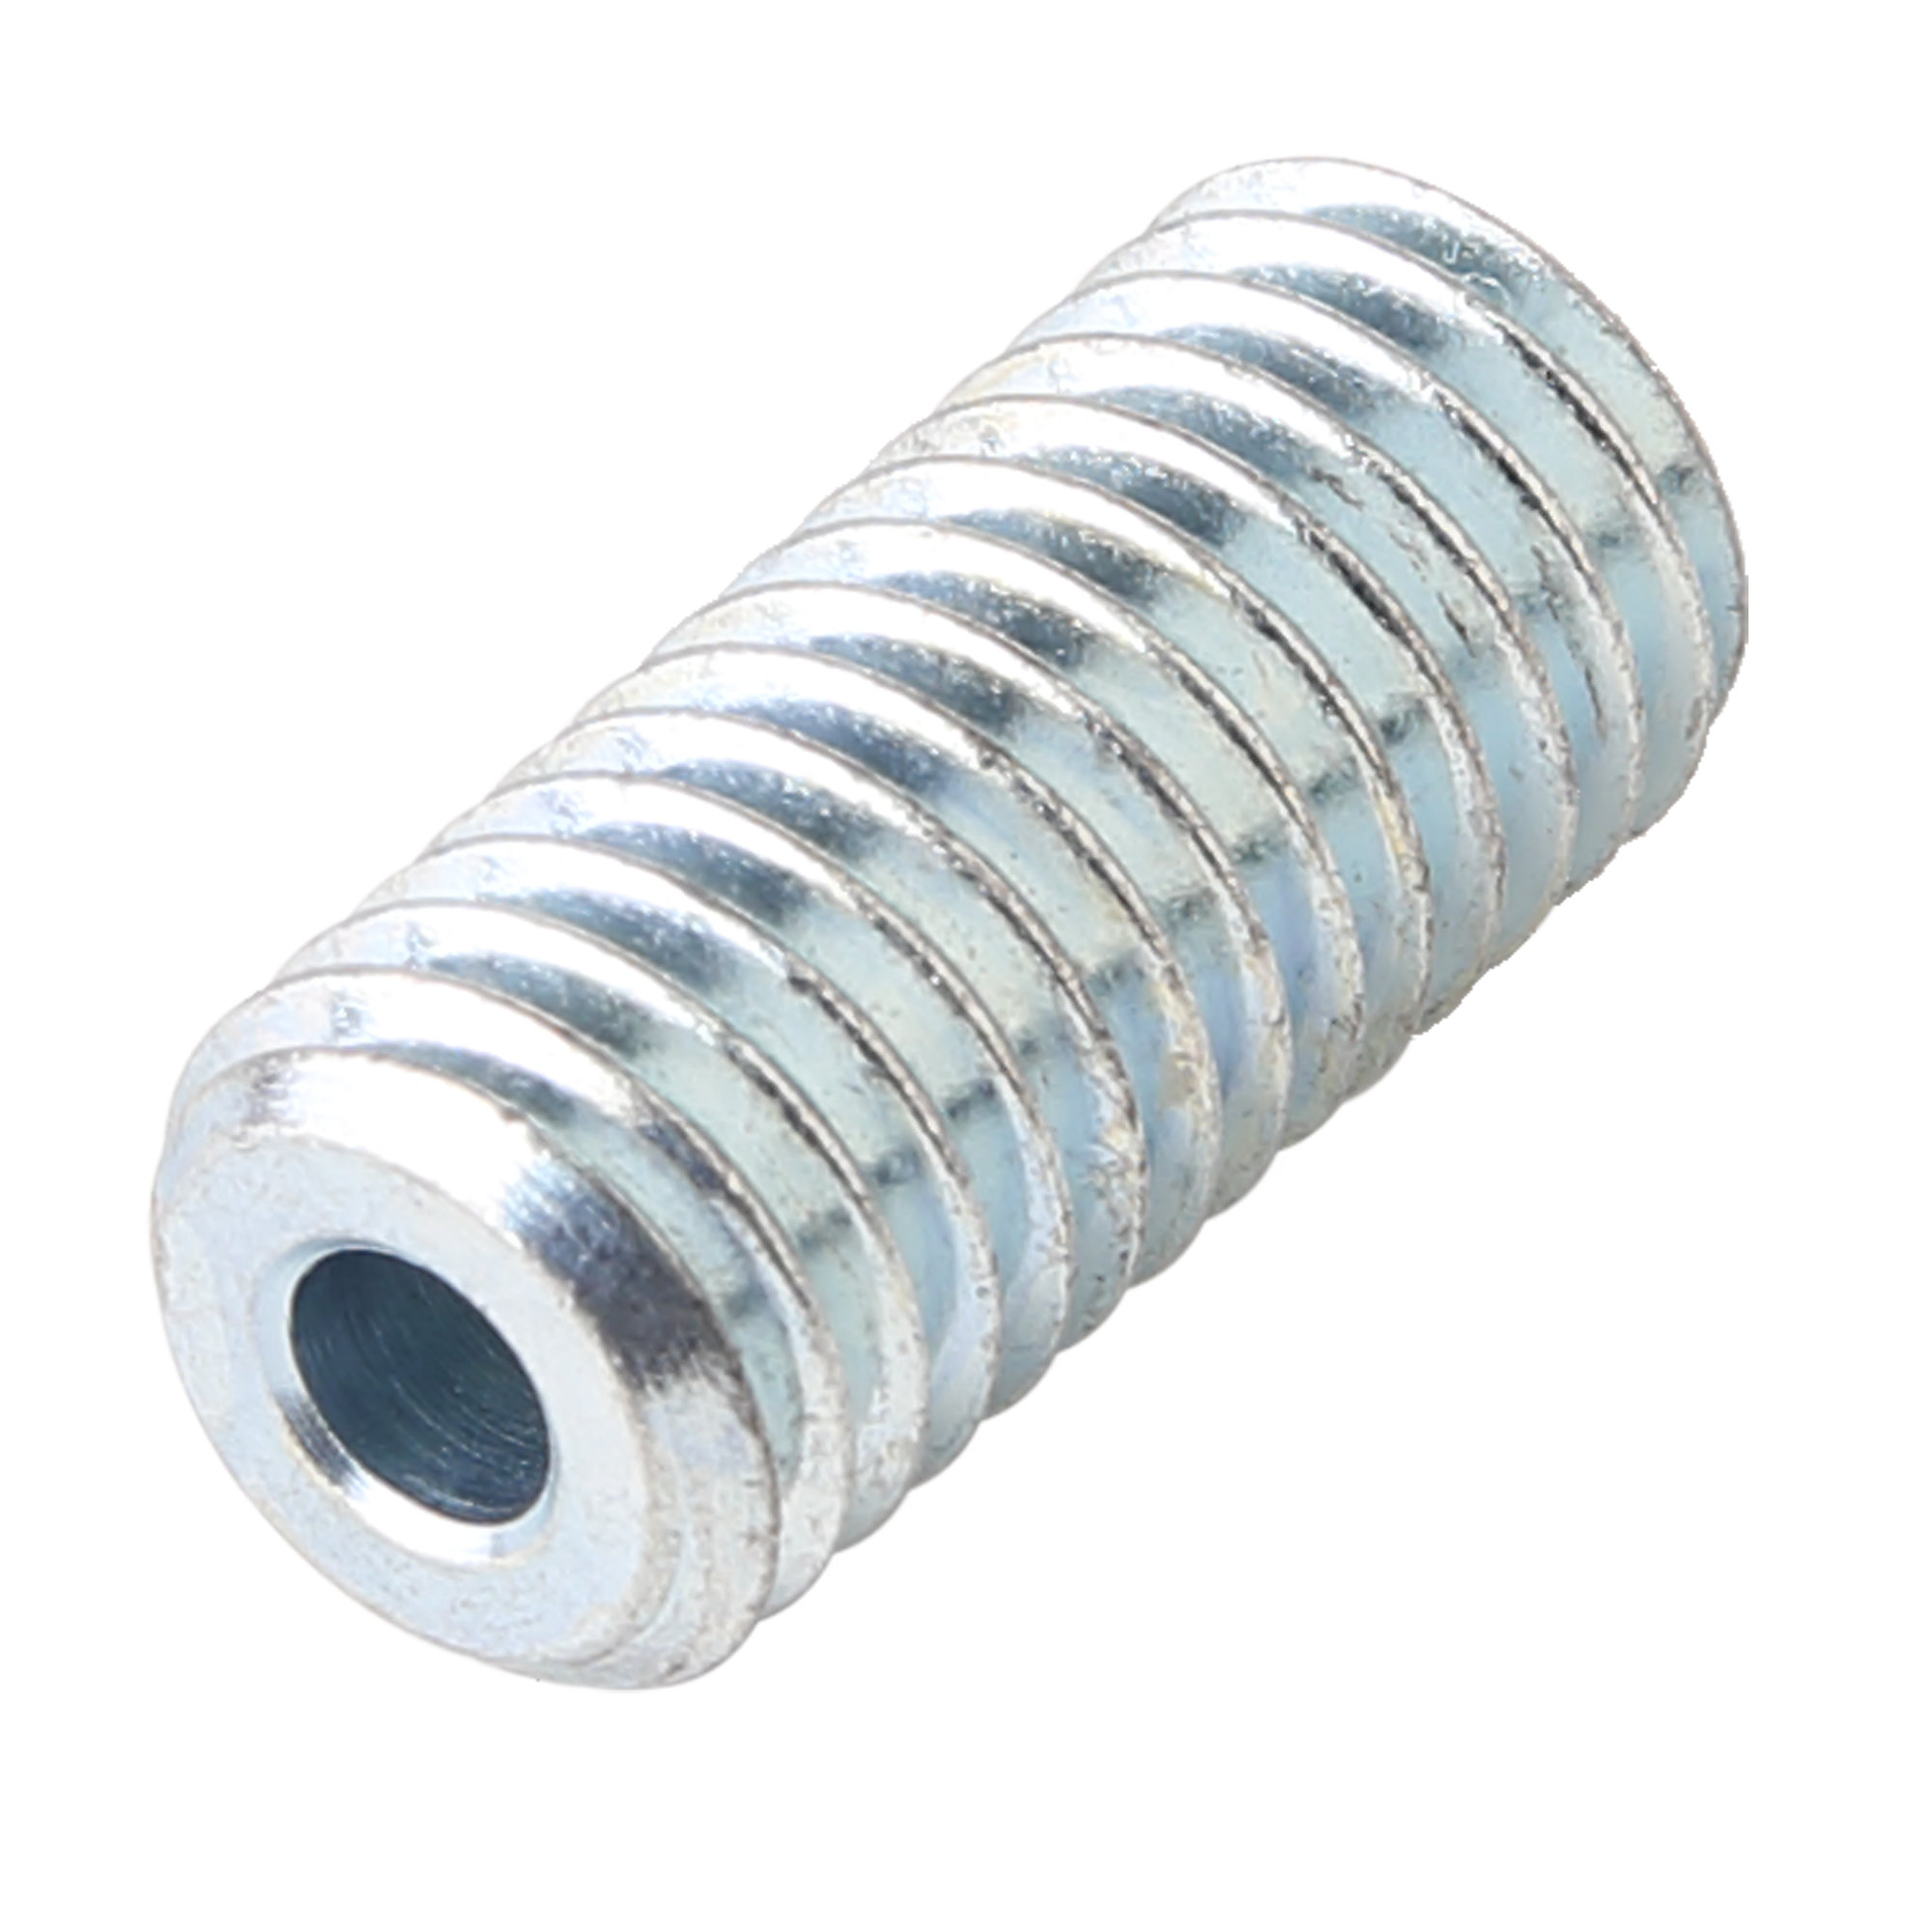 Threaded Plug 1/8In Str Cable